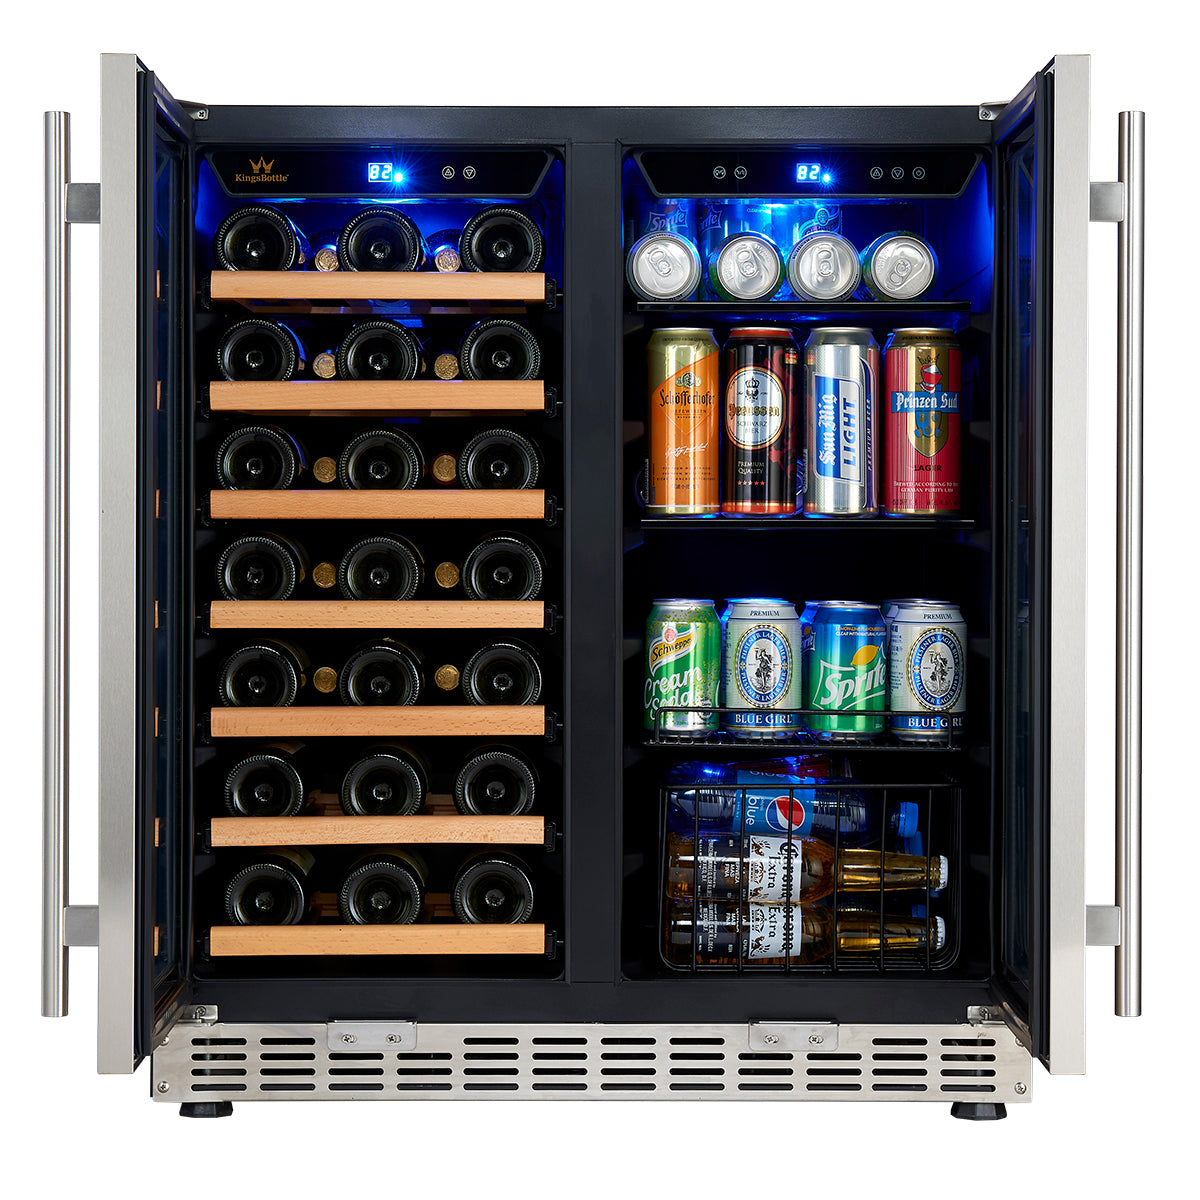 Alt text: "Kings Bottle 30" Under Counter Low-E Glass Door Wine and Beer Cooler Combo - A refrigerator with bottles and cans of wine, beer, and fizzy drinks."